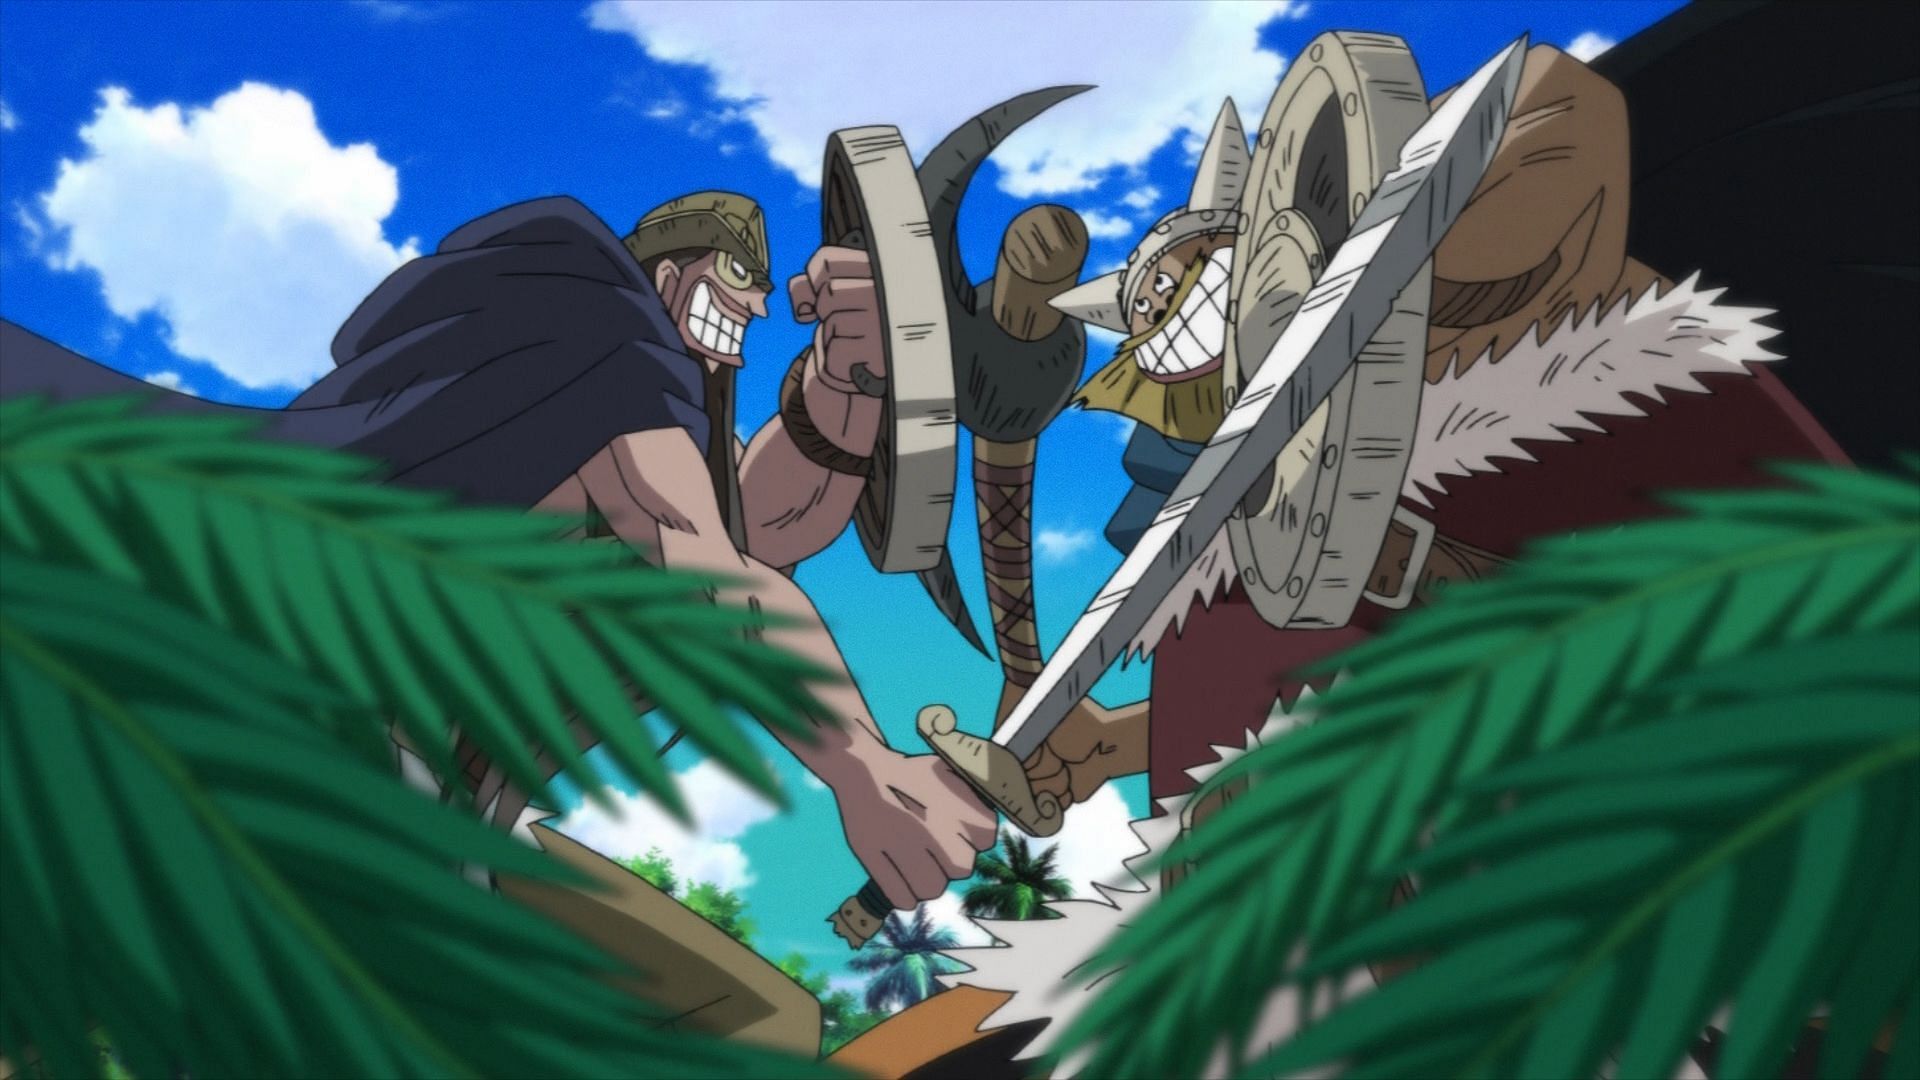 Dorry and Brogy officially begin their rescue of the Straw Hats in One Piece chapter 1108 (Image via Toei Animation)